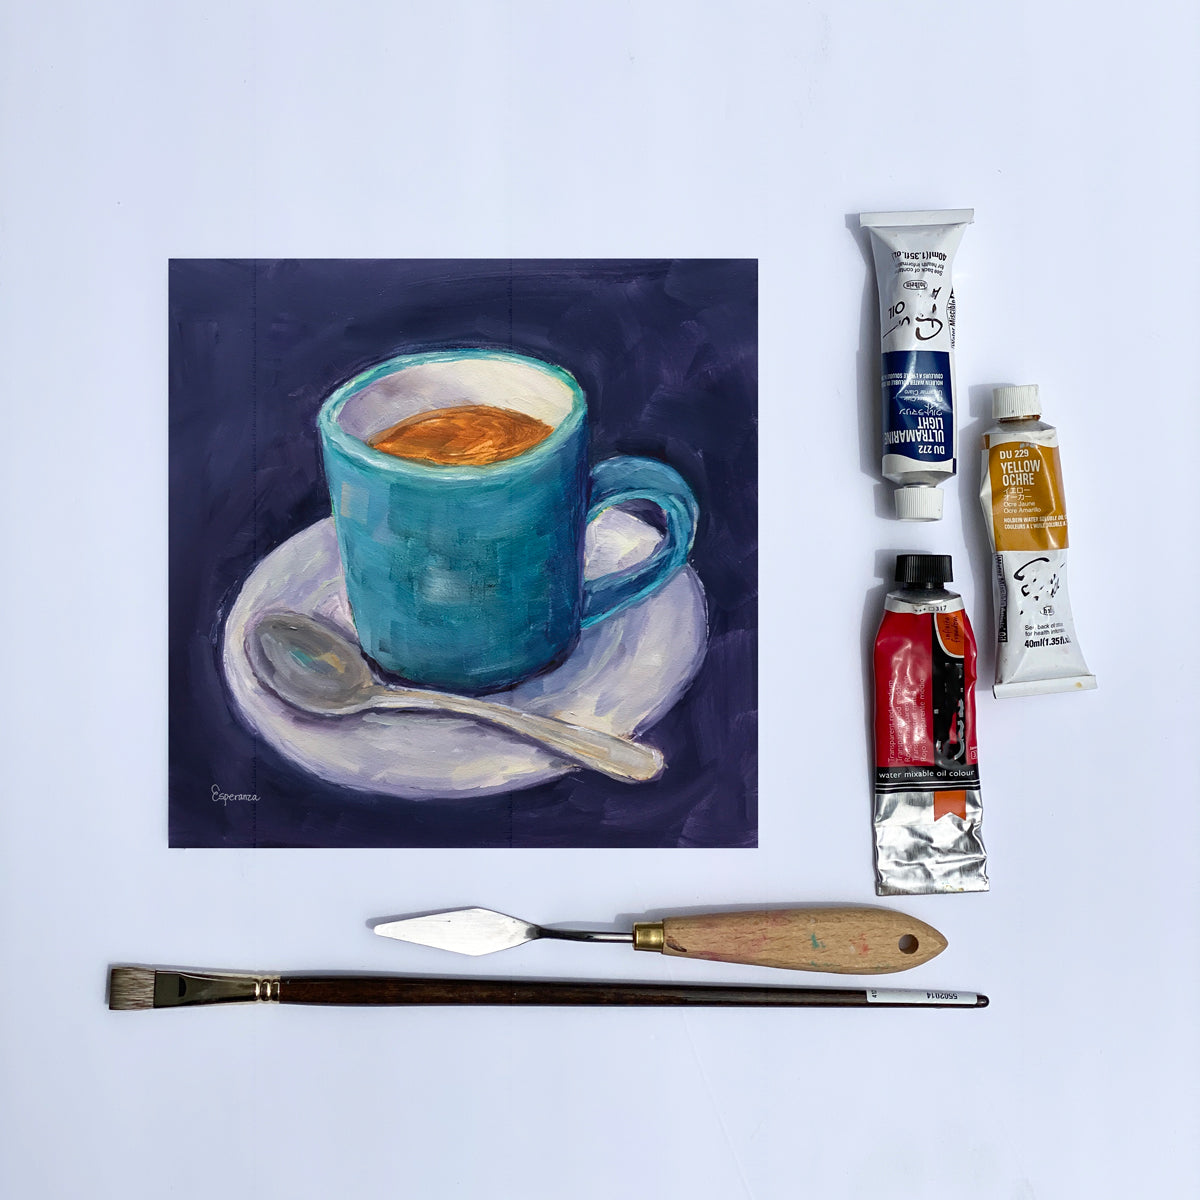 "Blue Cup in Saucer" giclee print